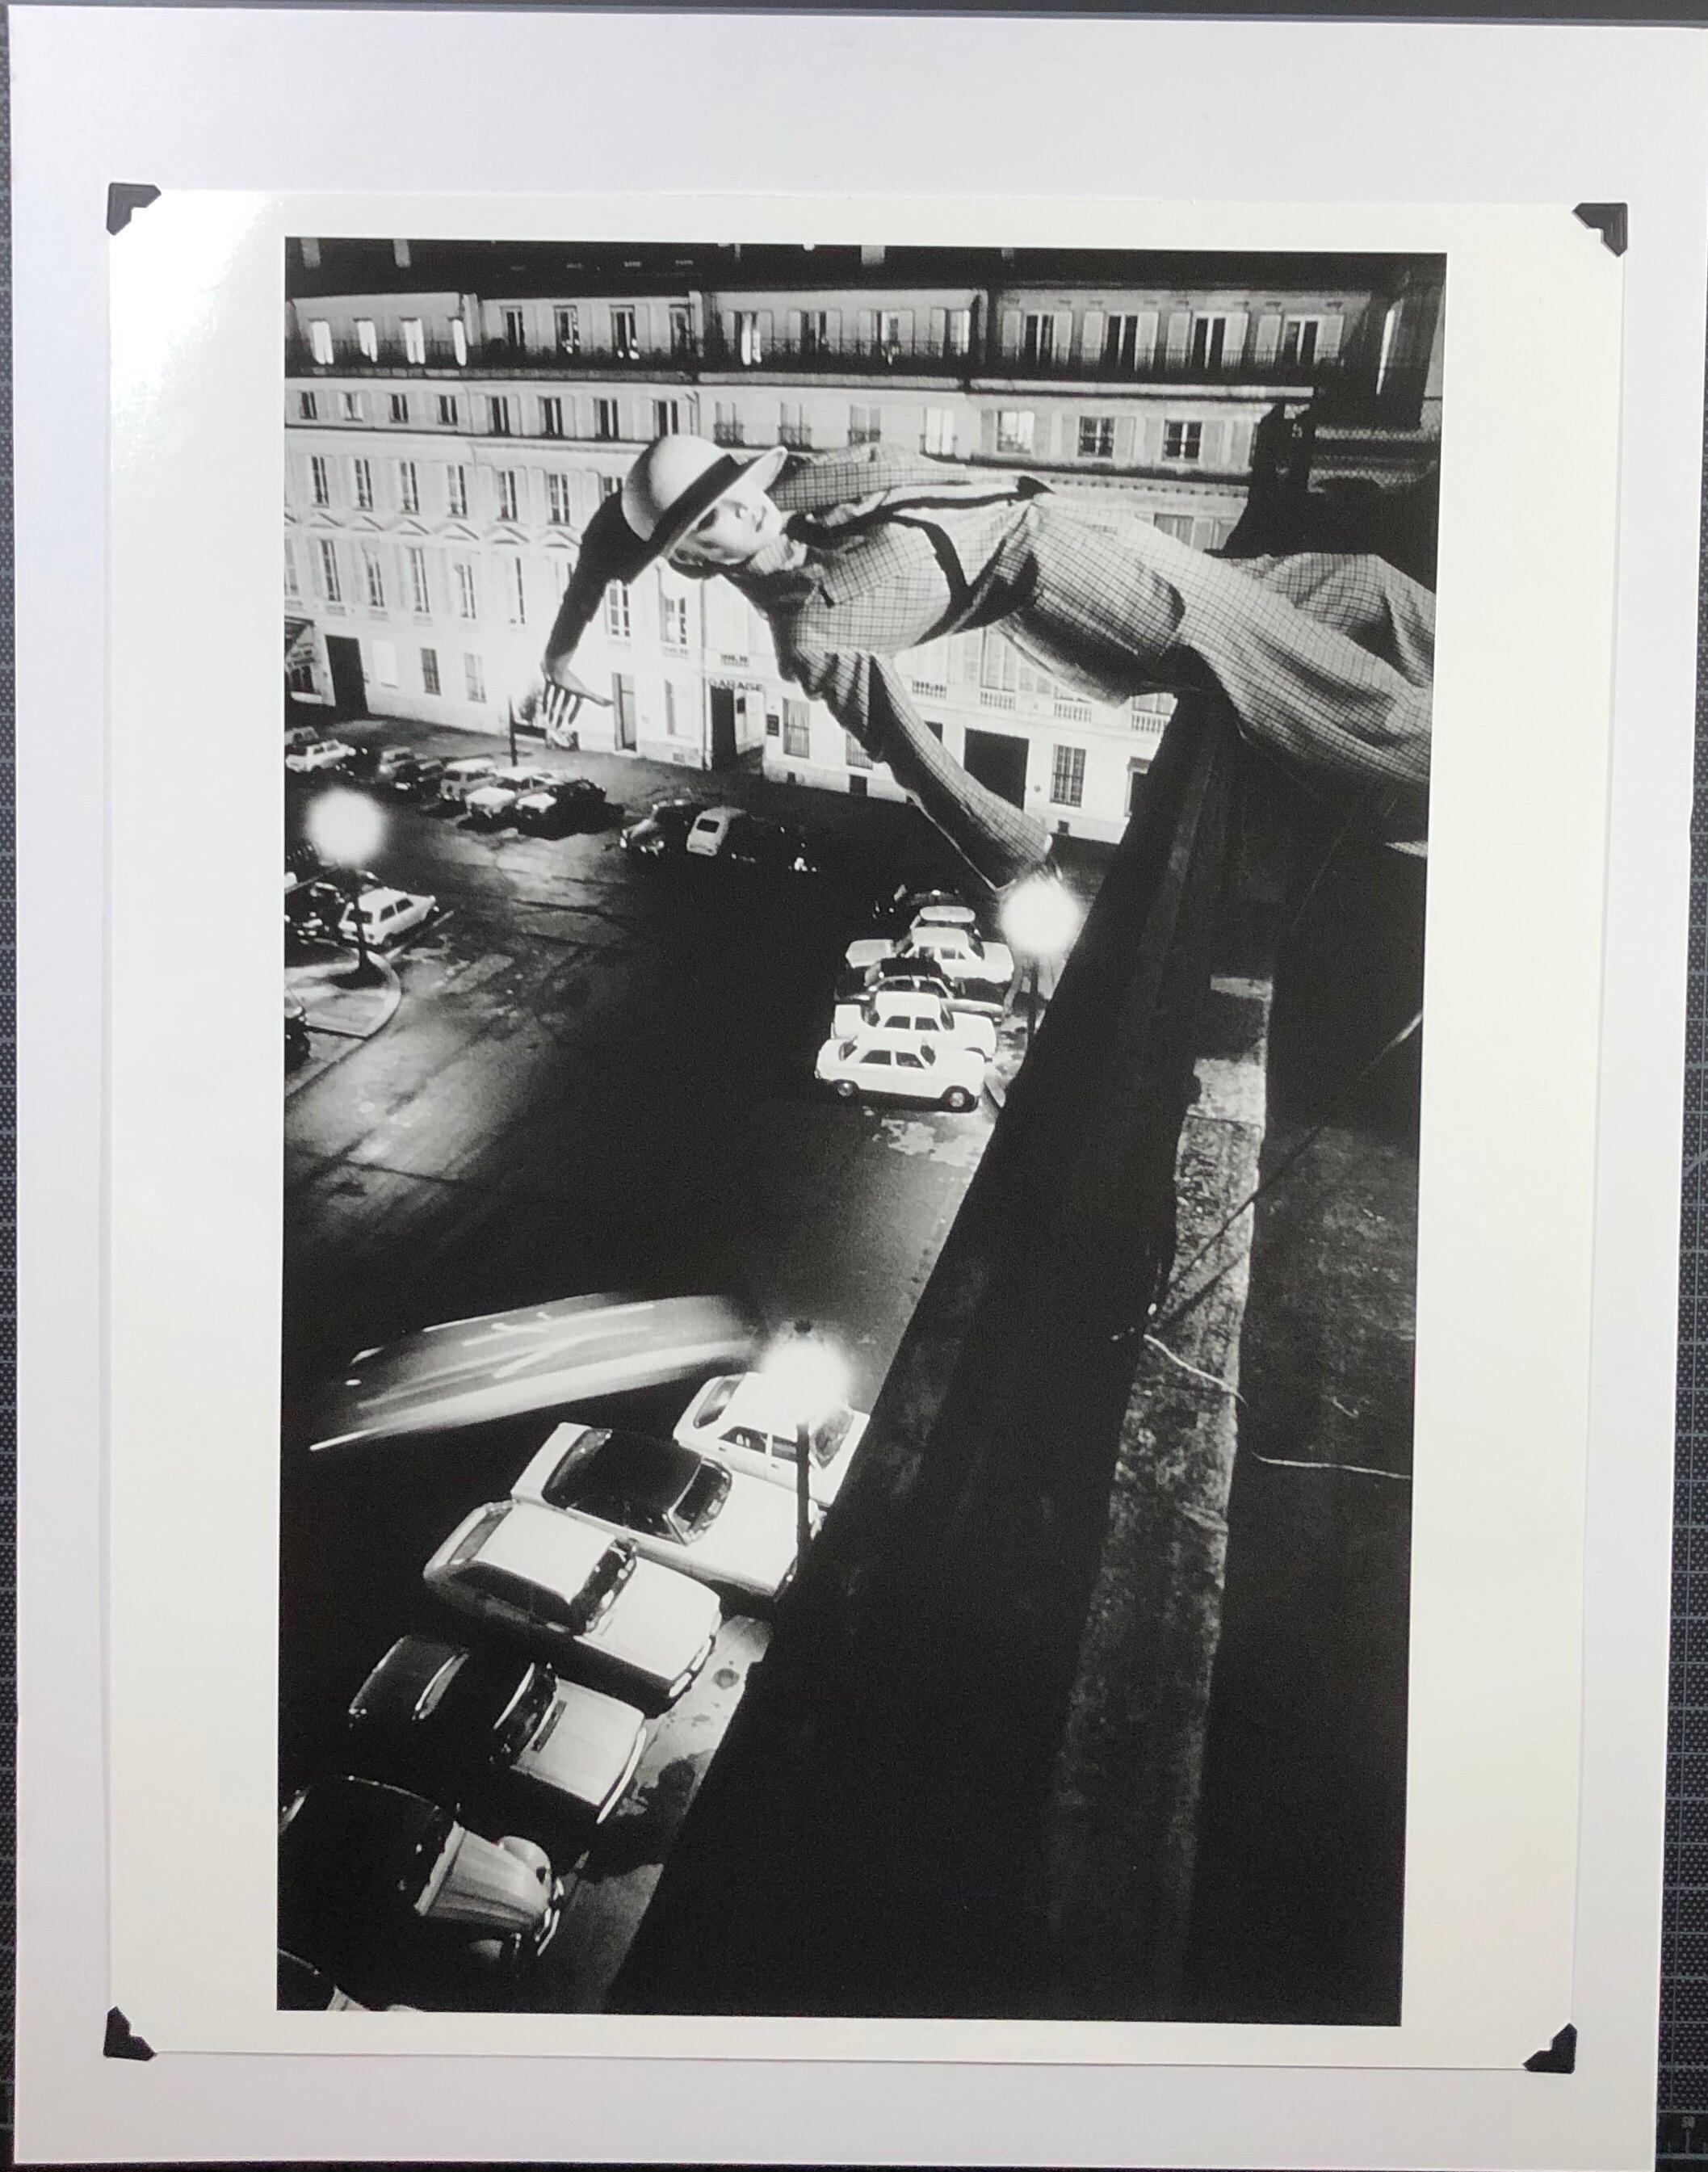 In ‘Mannequin Toss, Paris 1978’, Newton recreates a surrealistic image taking direction from Yves Klein's seminal 